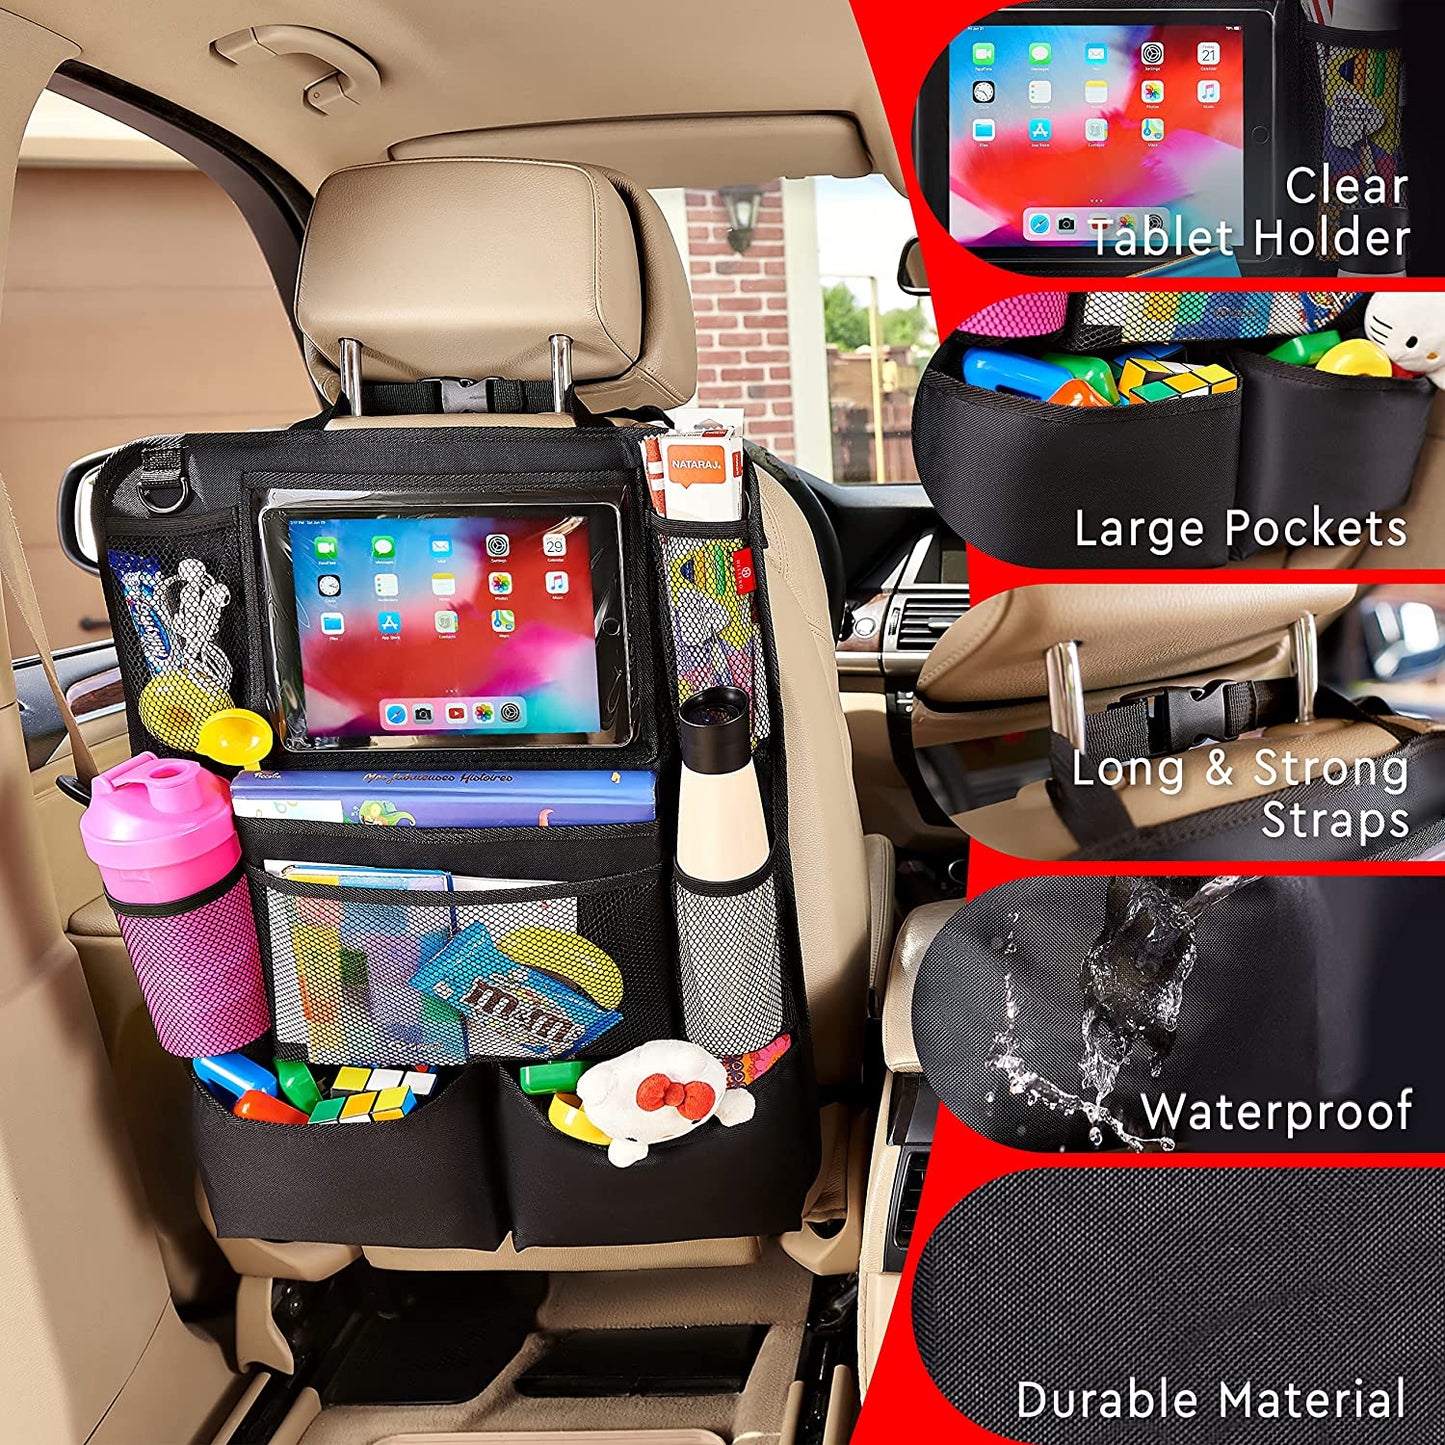 Helteko Backseat Car Organizer, Kick Mats Back Seat Protector with Touch Screen Tablet Holder, Car Back Seat Organizer for Kids, Car Travel Accessories, Kick Mat with 9 Storage Pockets 2 Pack, Black